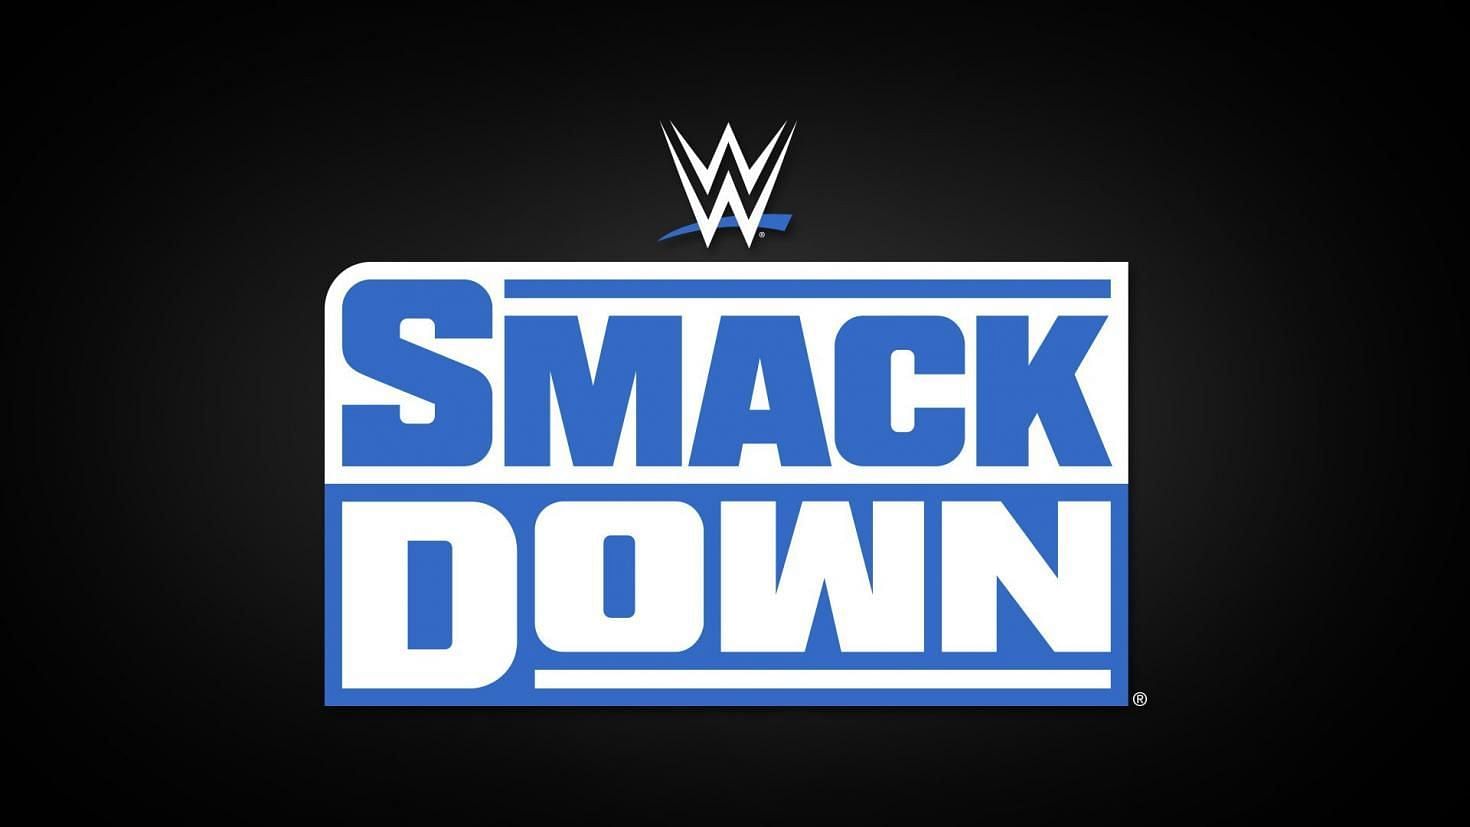 Update on the last two WWE SmackDown episodes of 2021 - Reports